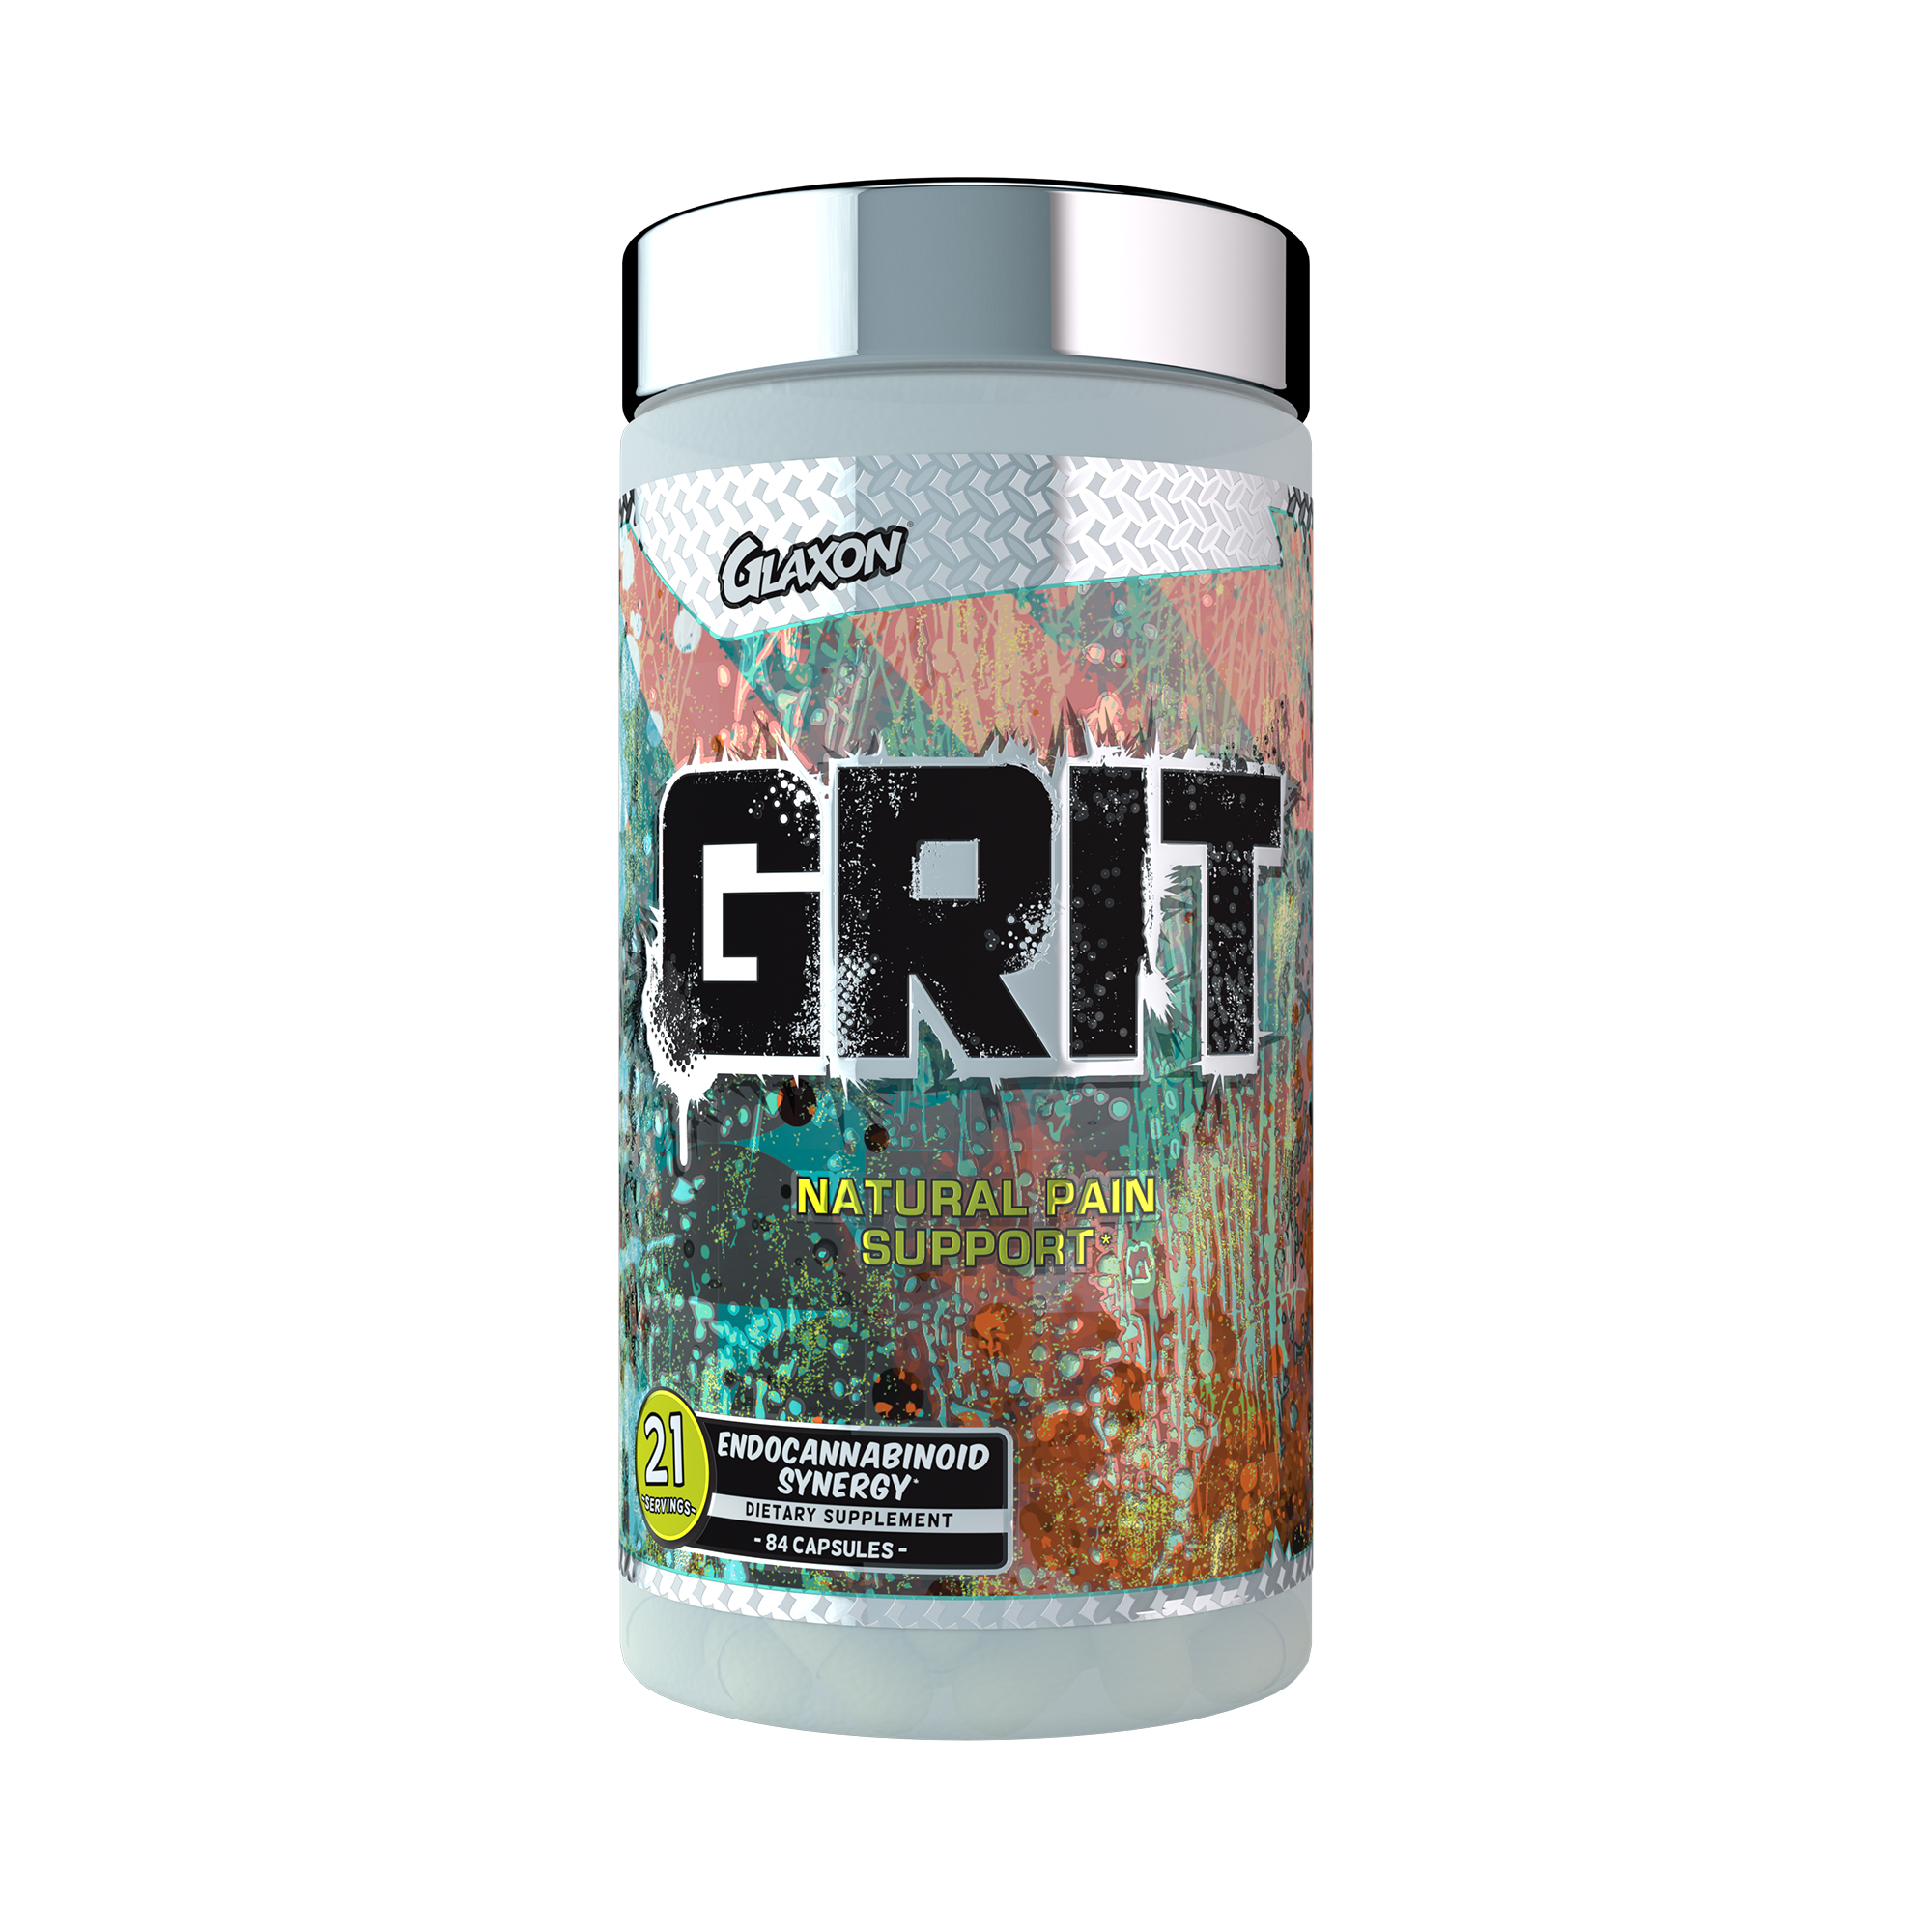 Glaxon Grit - Natural Pain Support